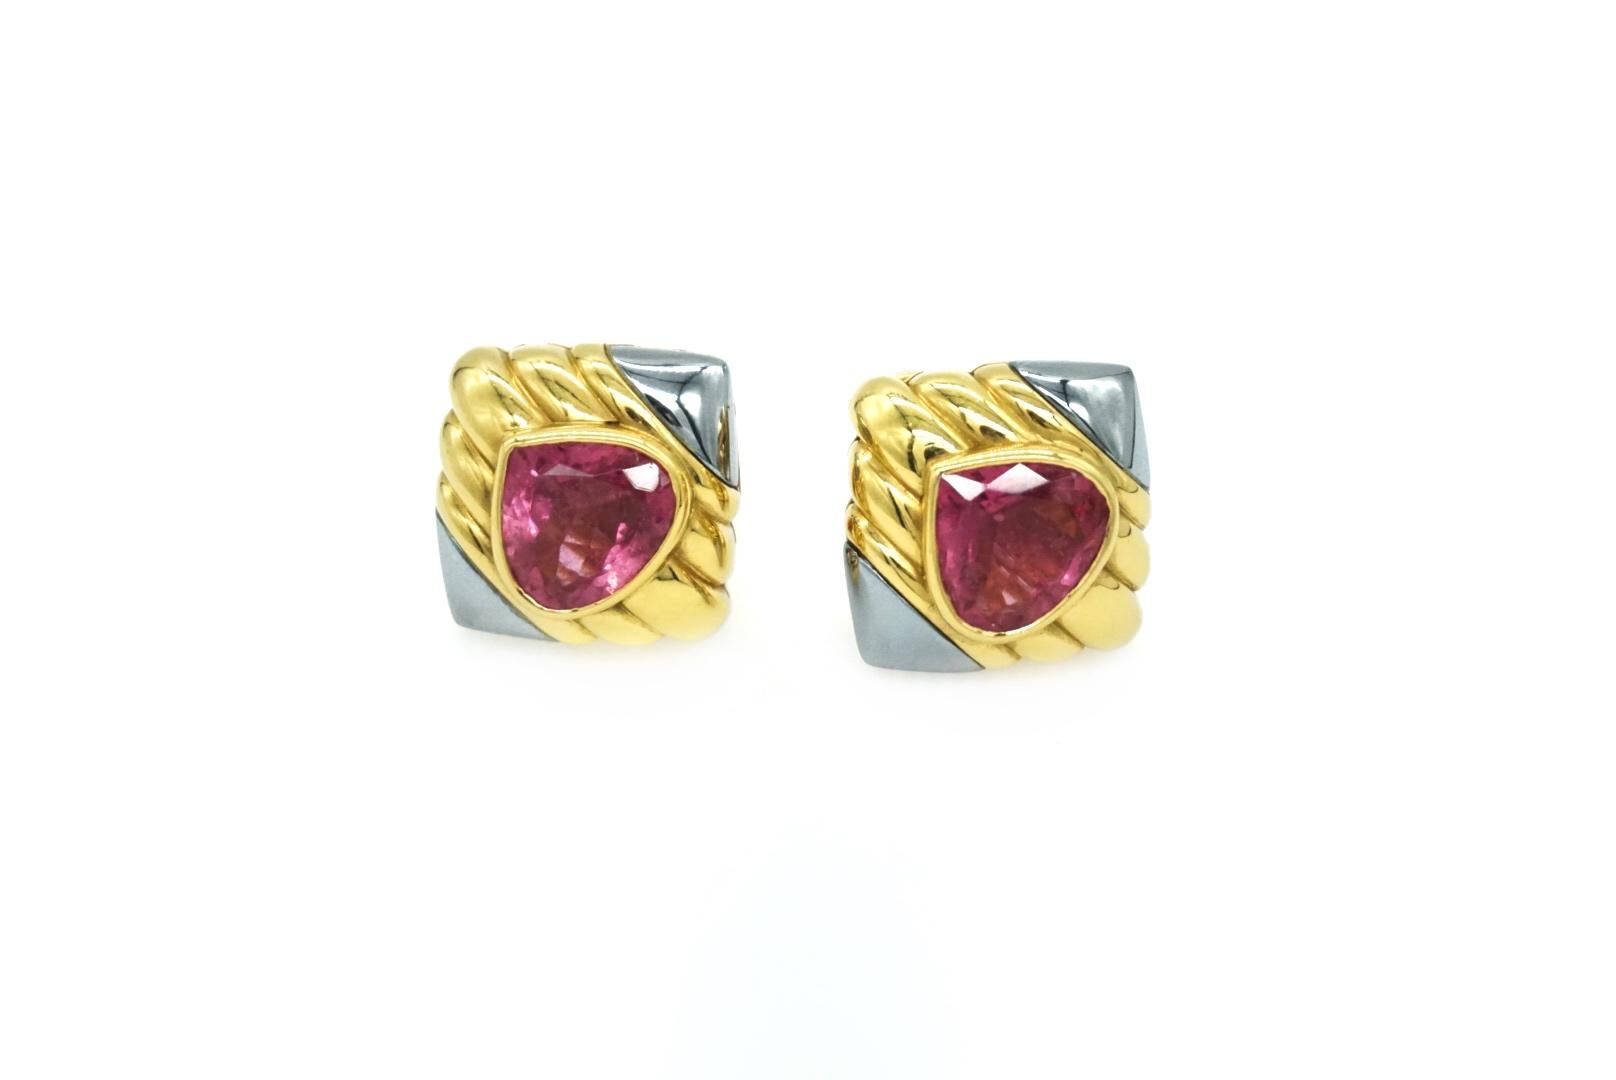 Bulgari 18k Yellow Gold, Hematite & Pink Tourmaline Earrings In Excellent Condition For Sale In New York, NY